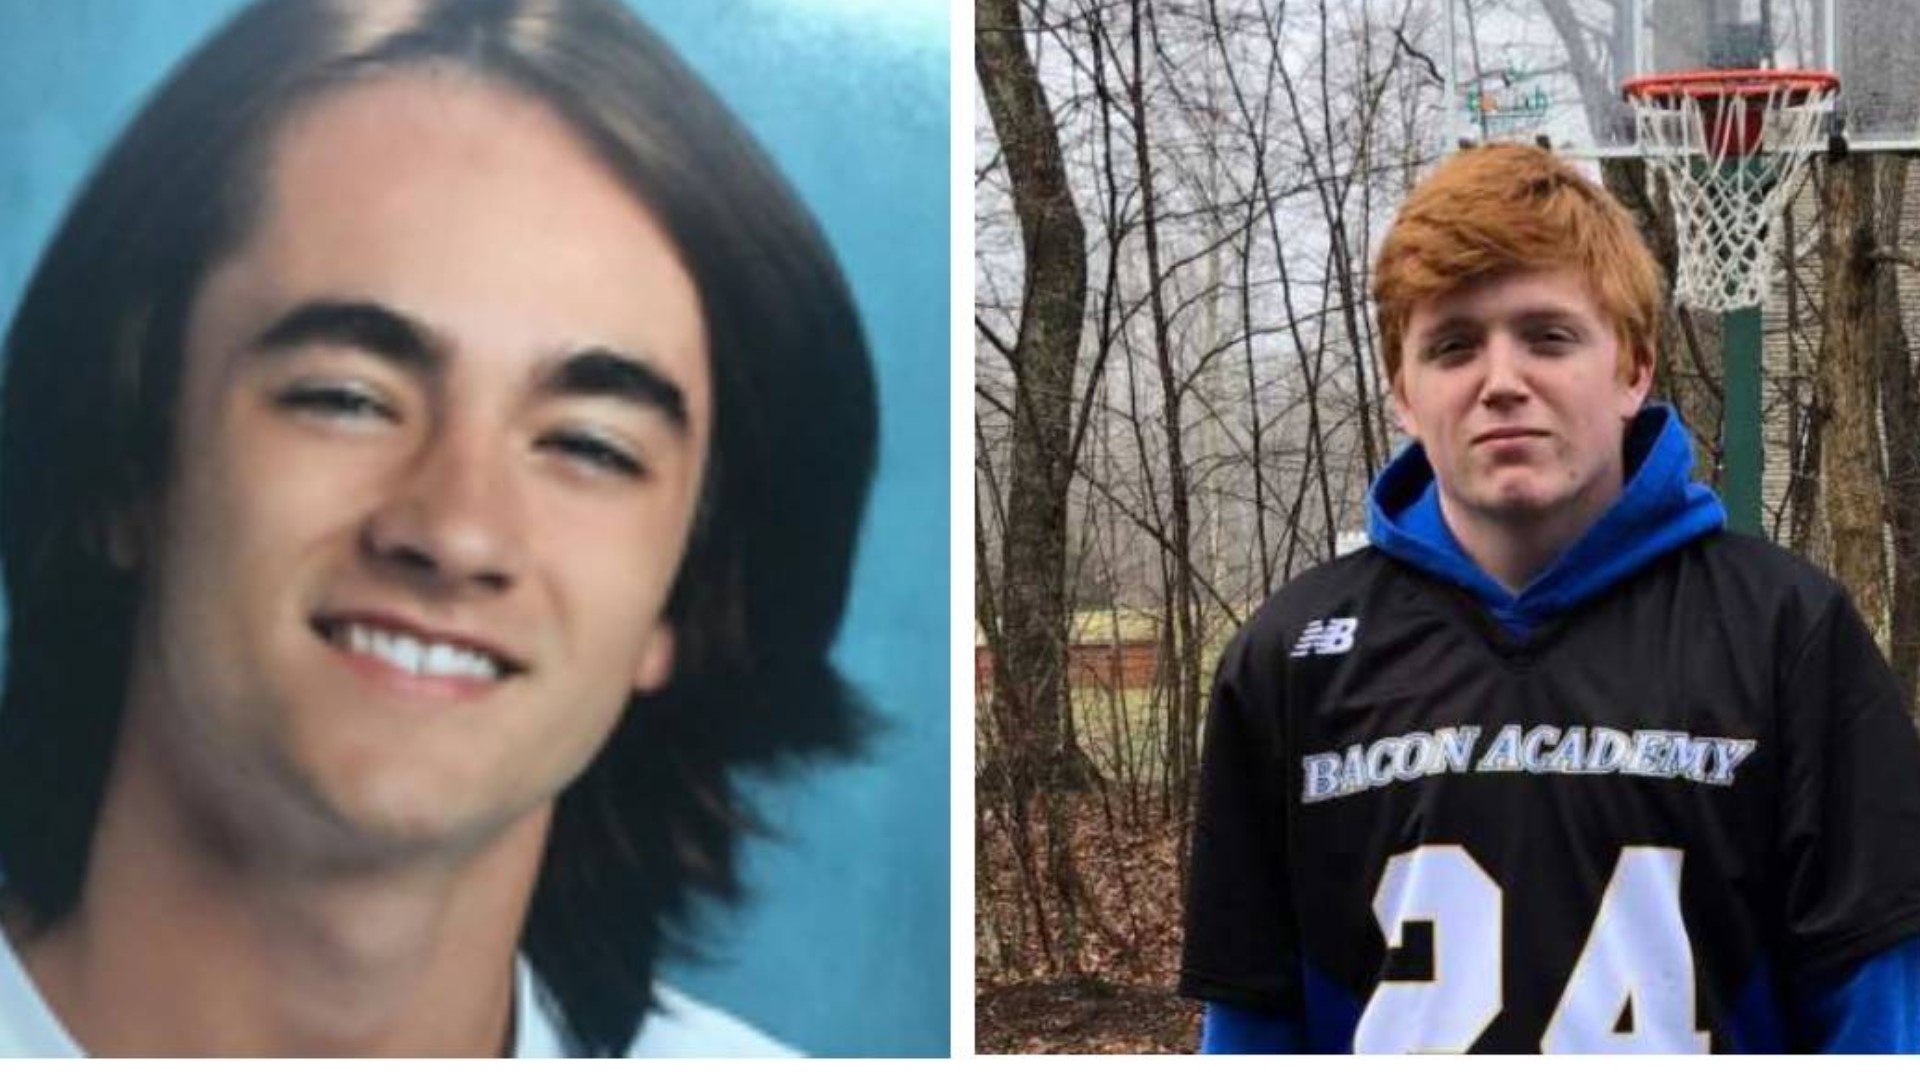 Jacob Chapman and Tyler Graham, both 18, died after the car they were in tried to pass another vehicle while driving on Route 354 by Lake Hayward Road in Colchester.